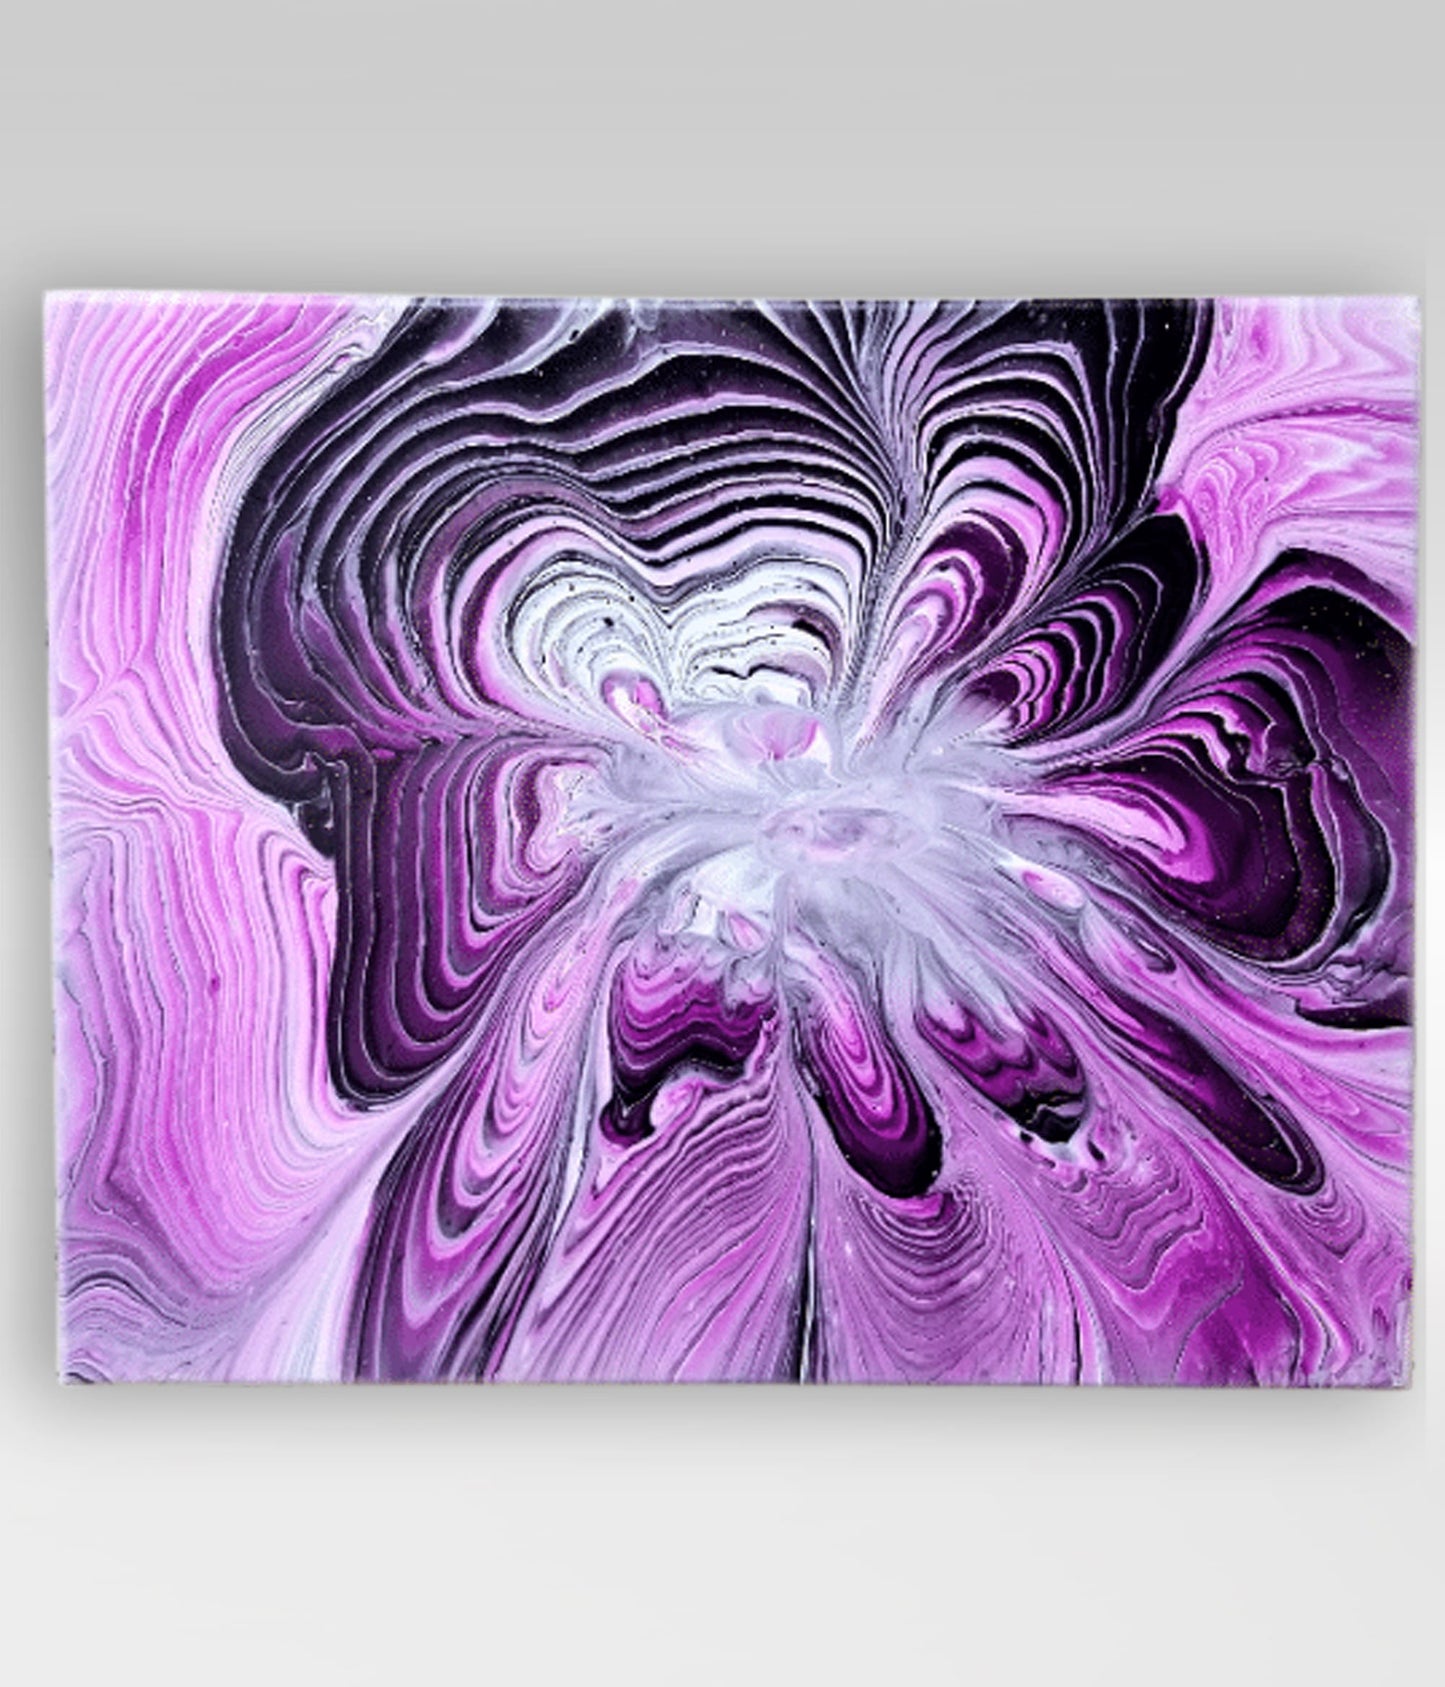 Gremlin Swirl – 16 x 20 Acrylic Pour Painting On Canvas